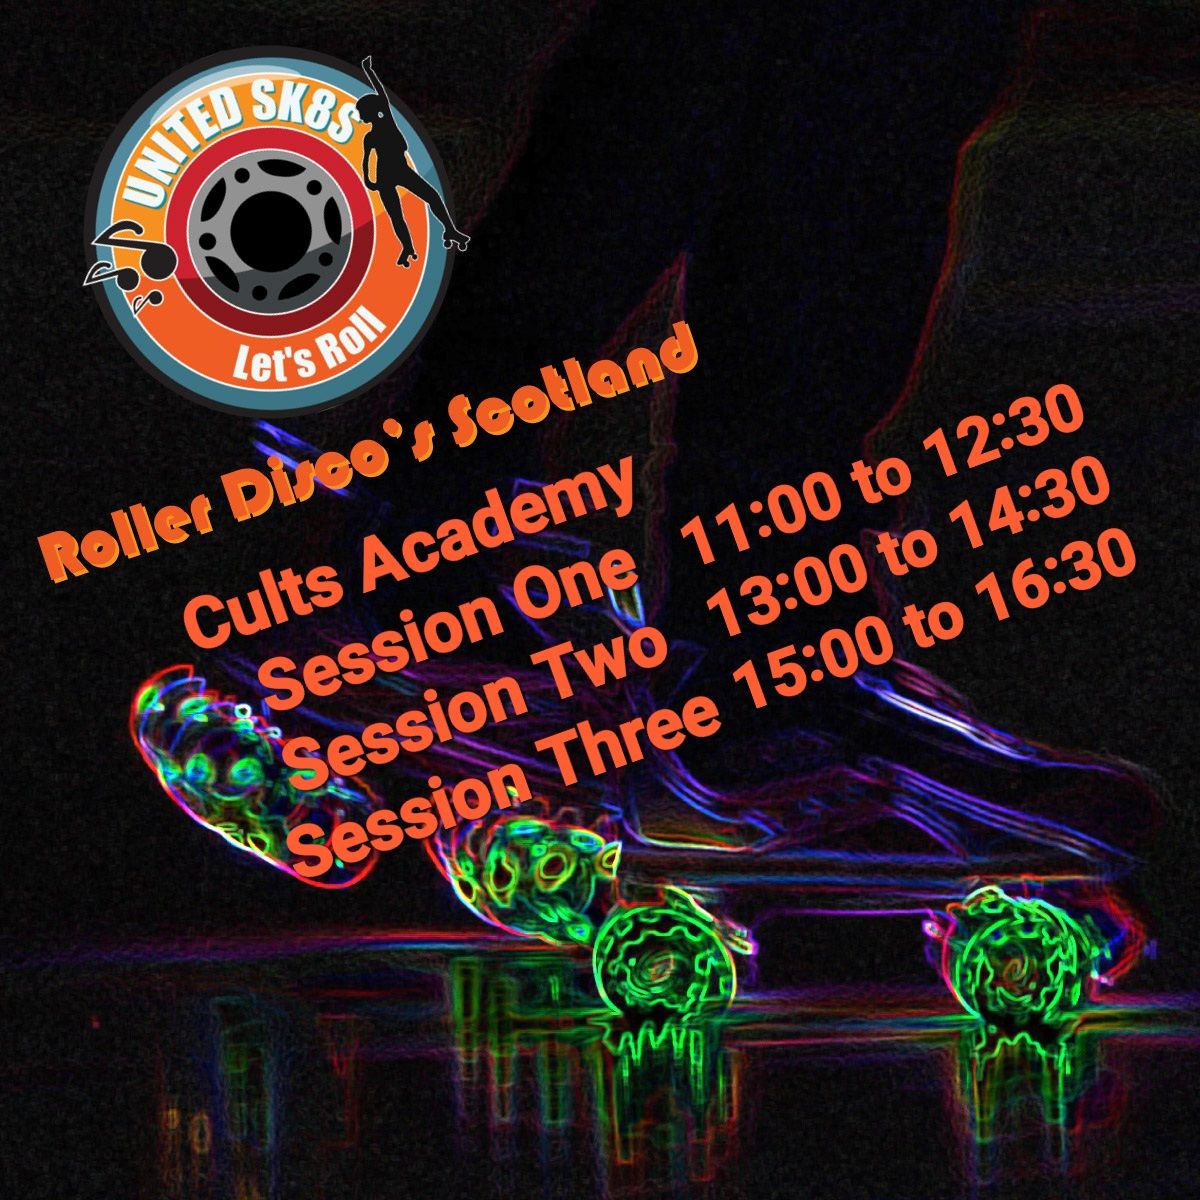 Aberdeen Family & Adult Roller Disco Session Three